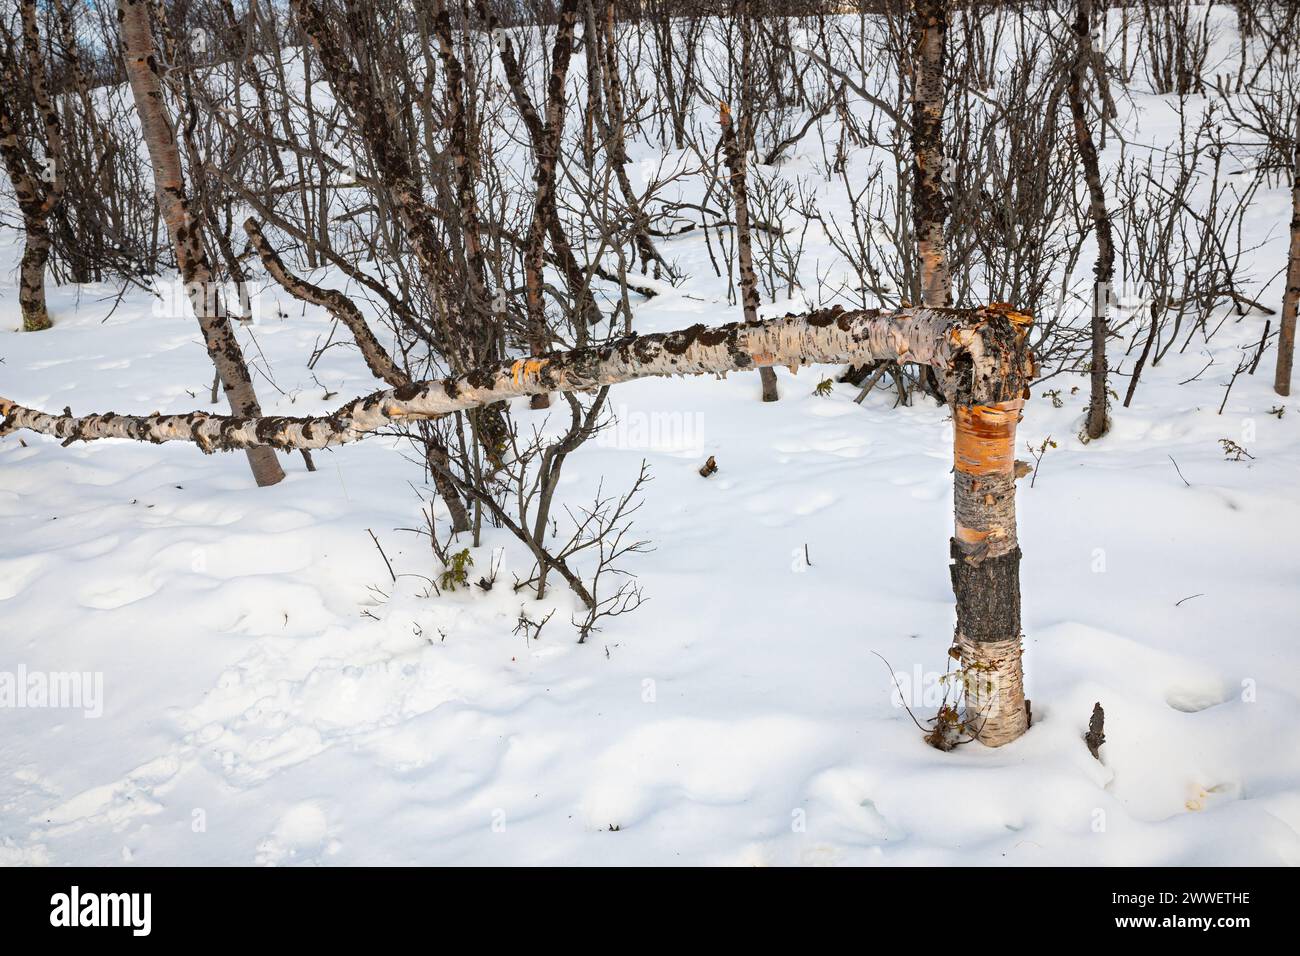 Snapped trunk of a birch tree in a snowy forest in northern Sweden in winter. Stock Photo